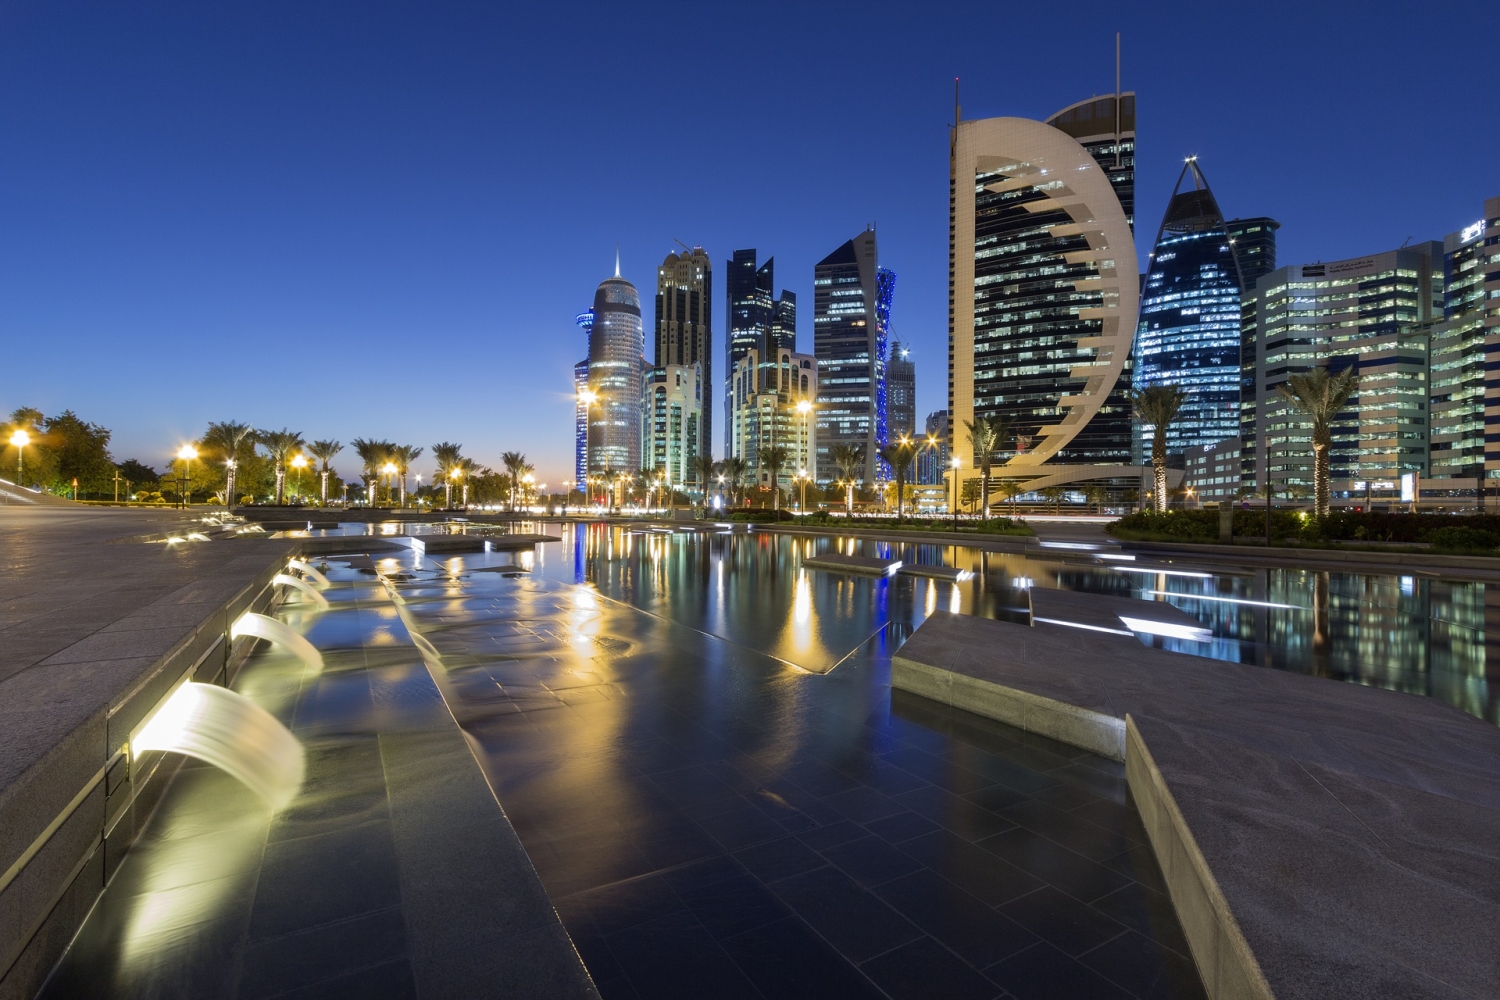 Qatar to be transformed into an outdoor art museum